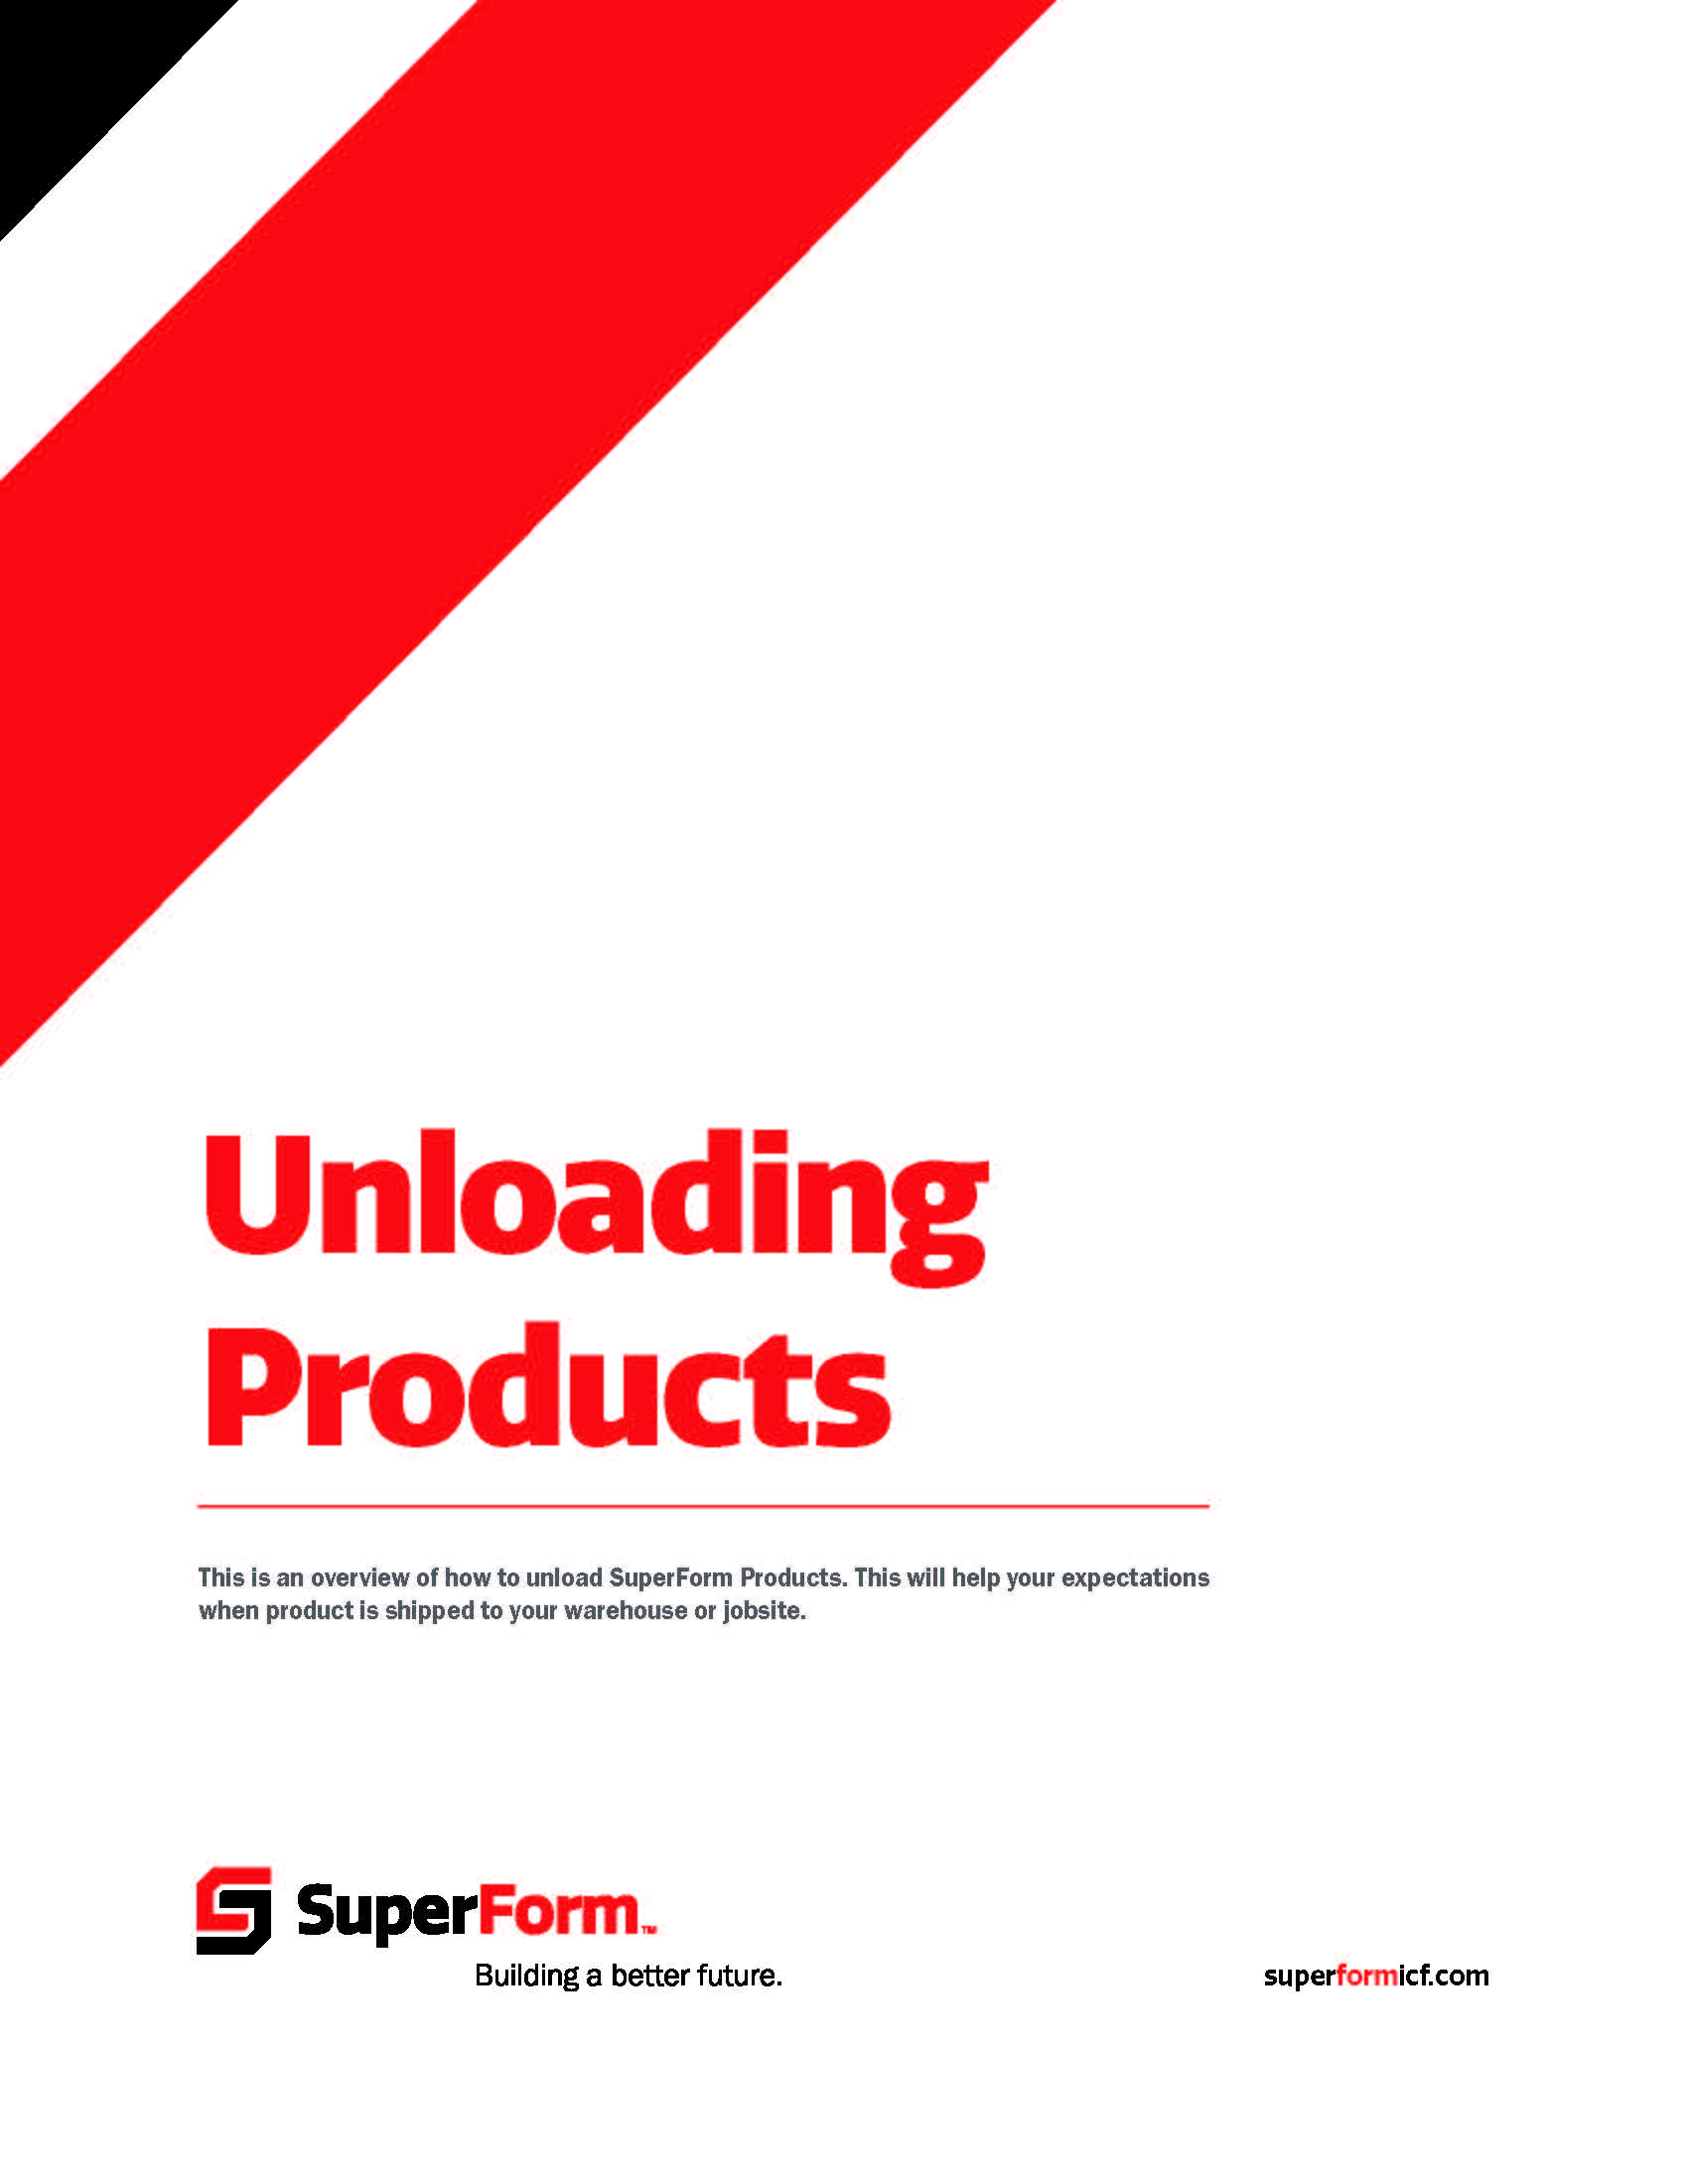 SuperForm_Unloading Products_120821_FINAL